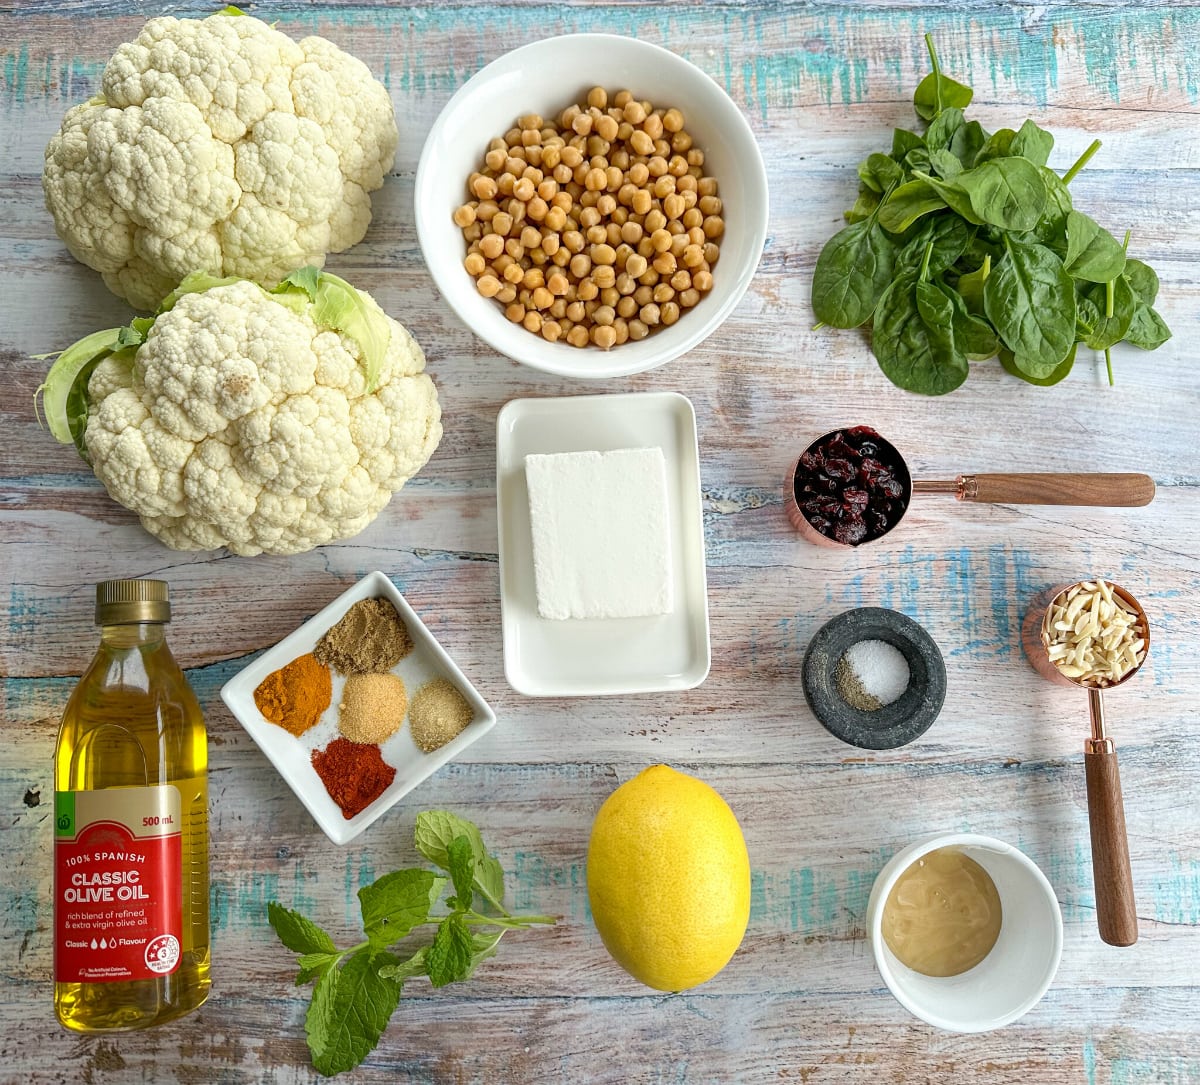 Ingredients I use to make a Roasted Cauliflower & Chickpea Salad - see recipe card for full details 